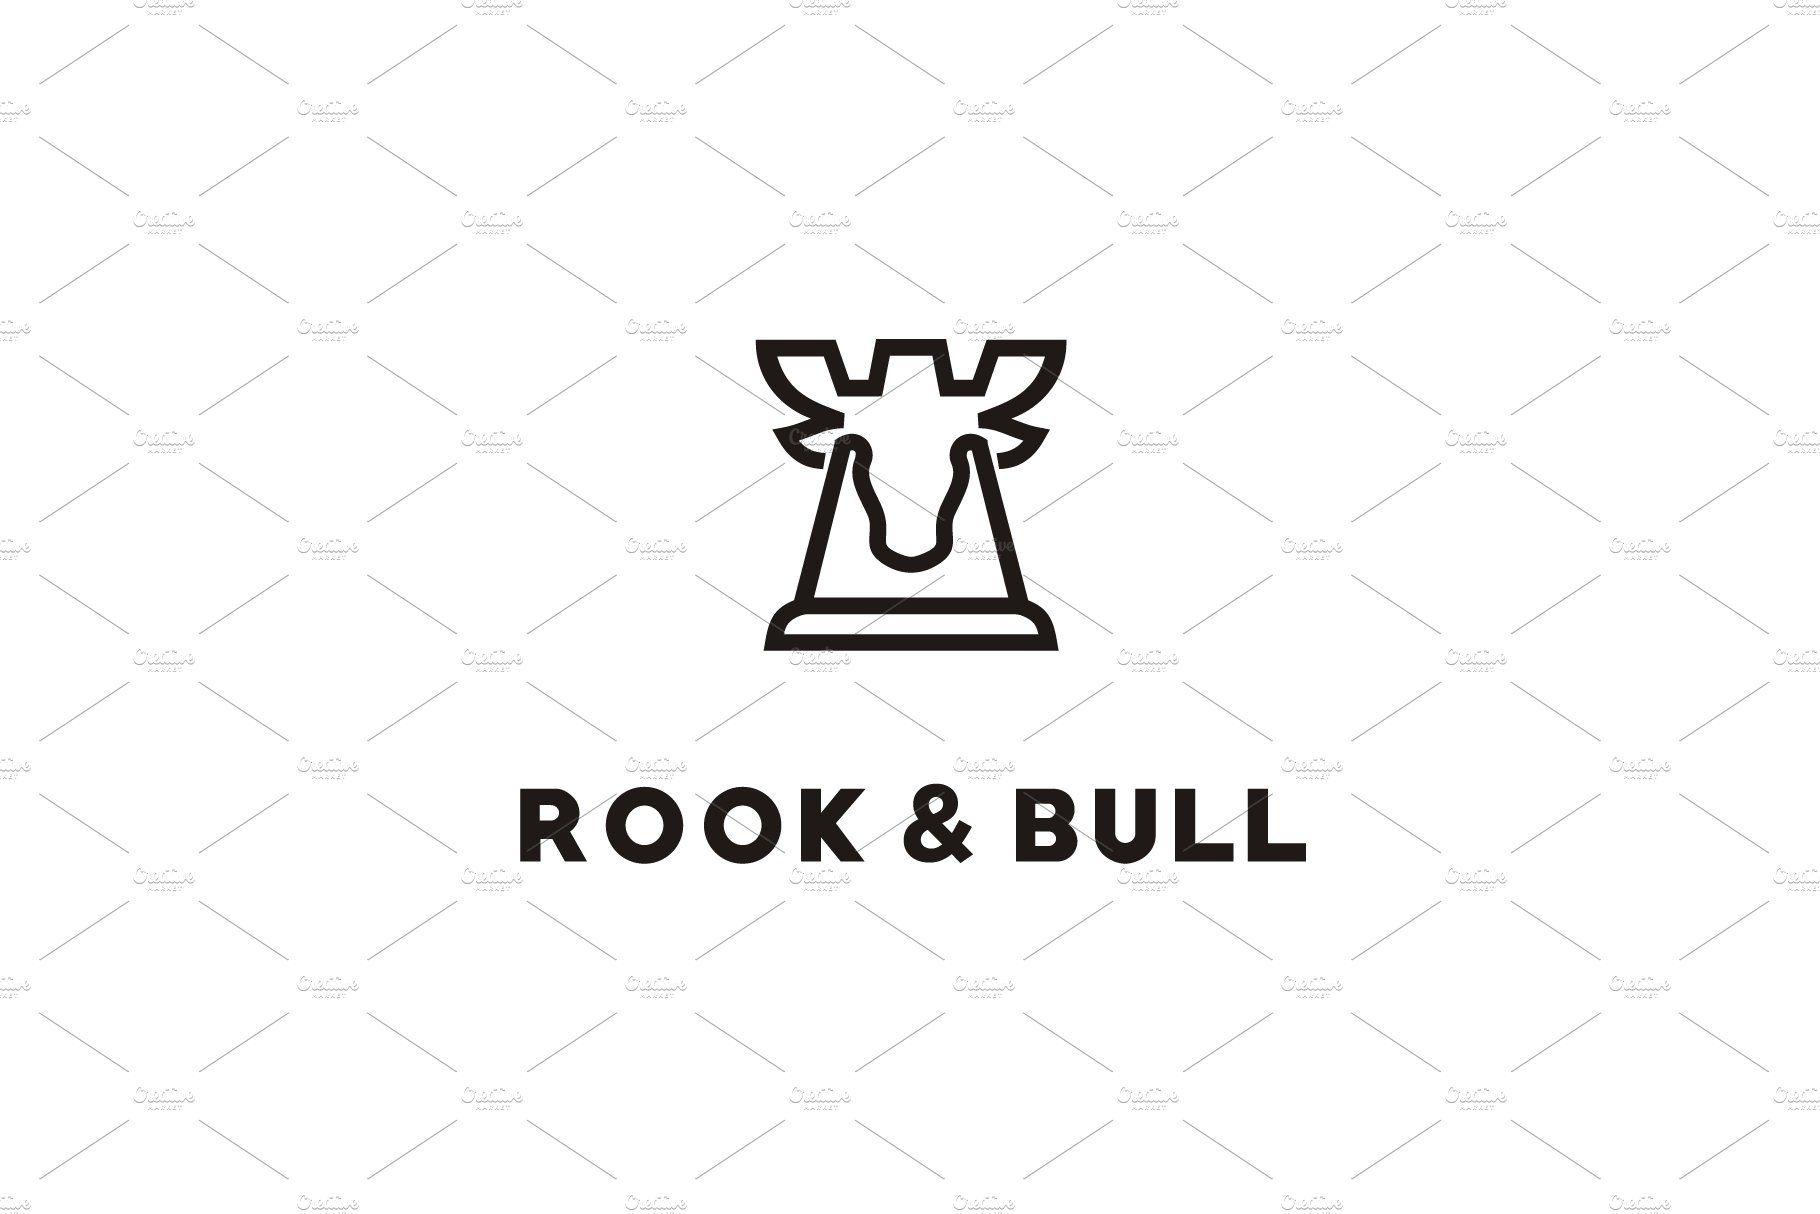 Rook Logo - Bull and rook / fortress logo design